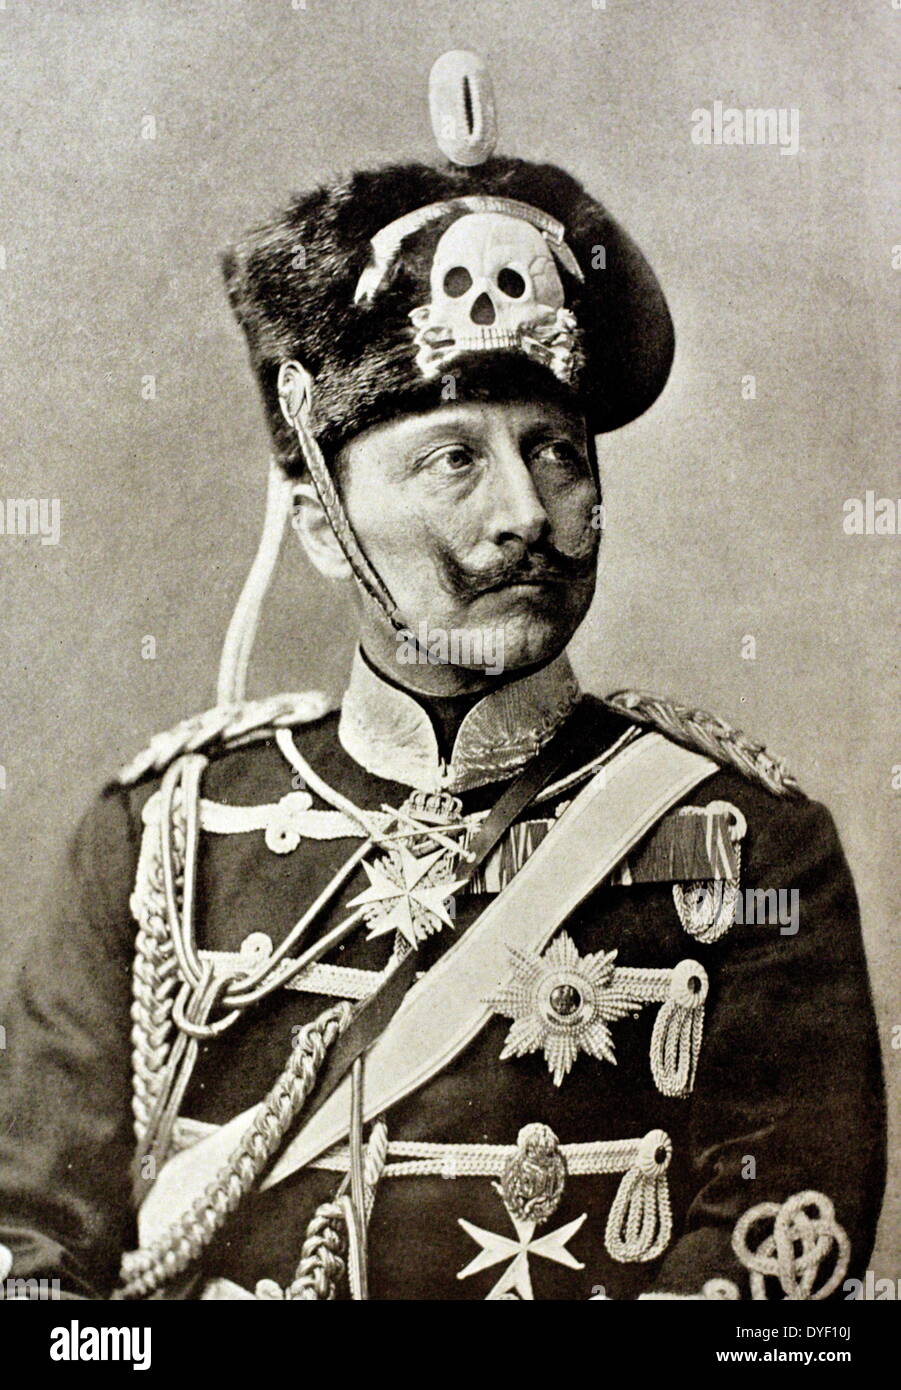 Portrait photograph of Kaiser Wilhelm III, (Frederick William Victor Albert of Prussia). Lived between 1859–1941, and was the last German Emperor and King of Prussia. He ruled the German Empire and the Kingdom of Prussia from June 1888 to November 1918, and was the grandson of the British Queen Victoria. Stock Photo